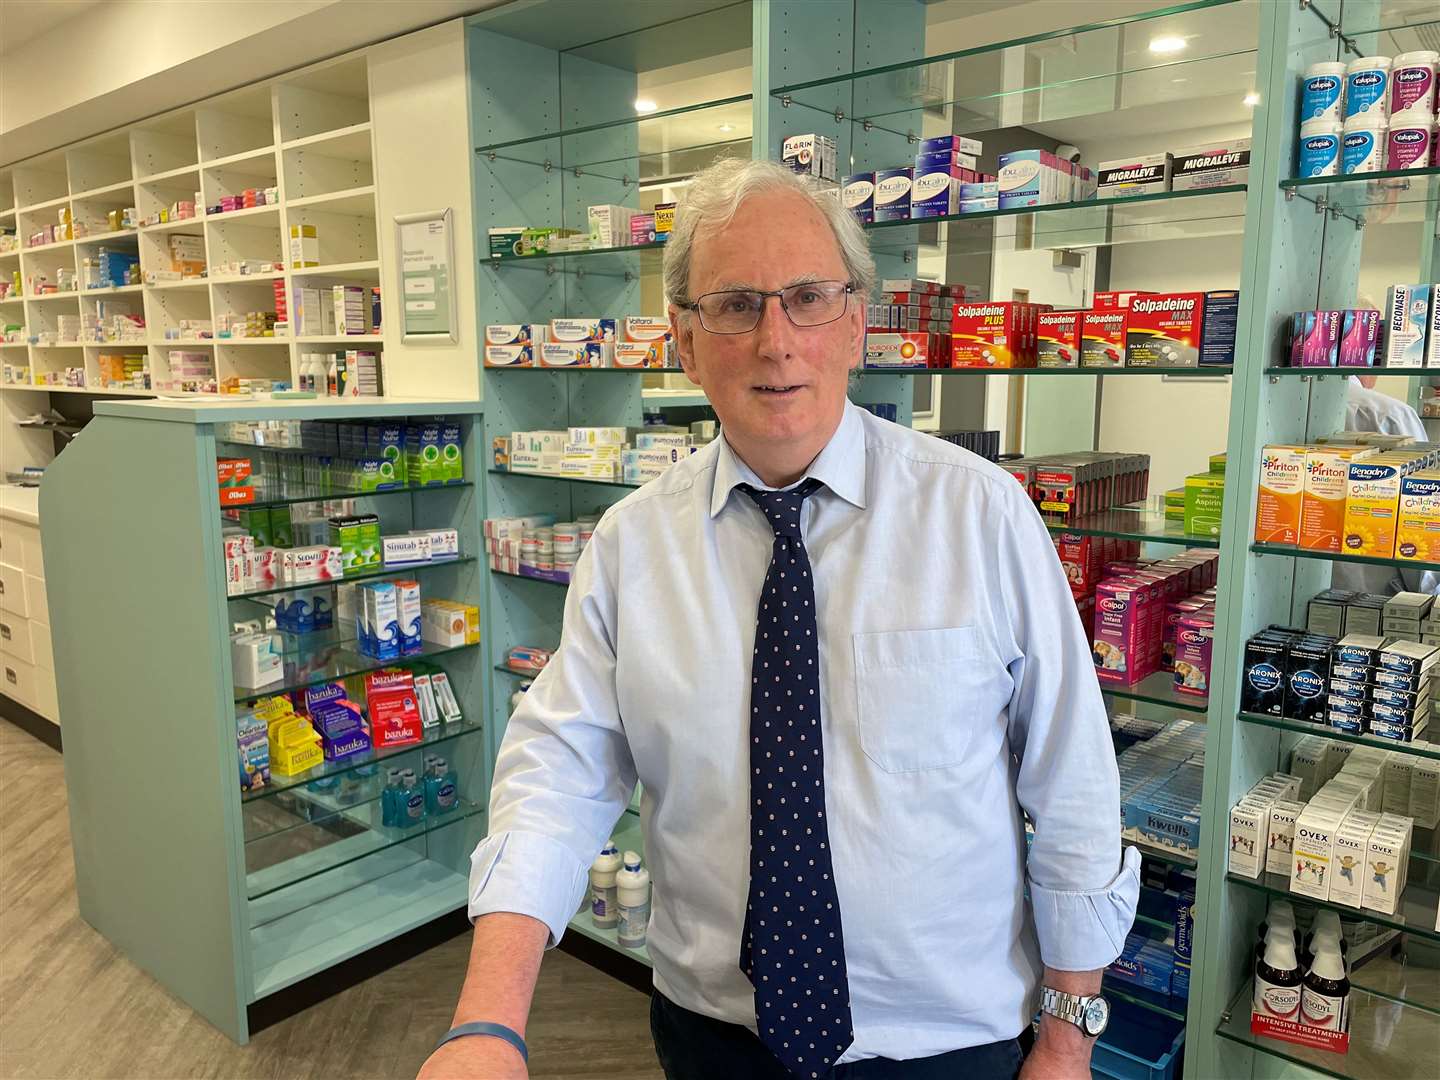 Pharmacist Stephen Kane said the new opening will be good for the community